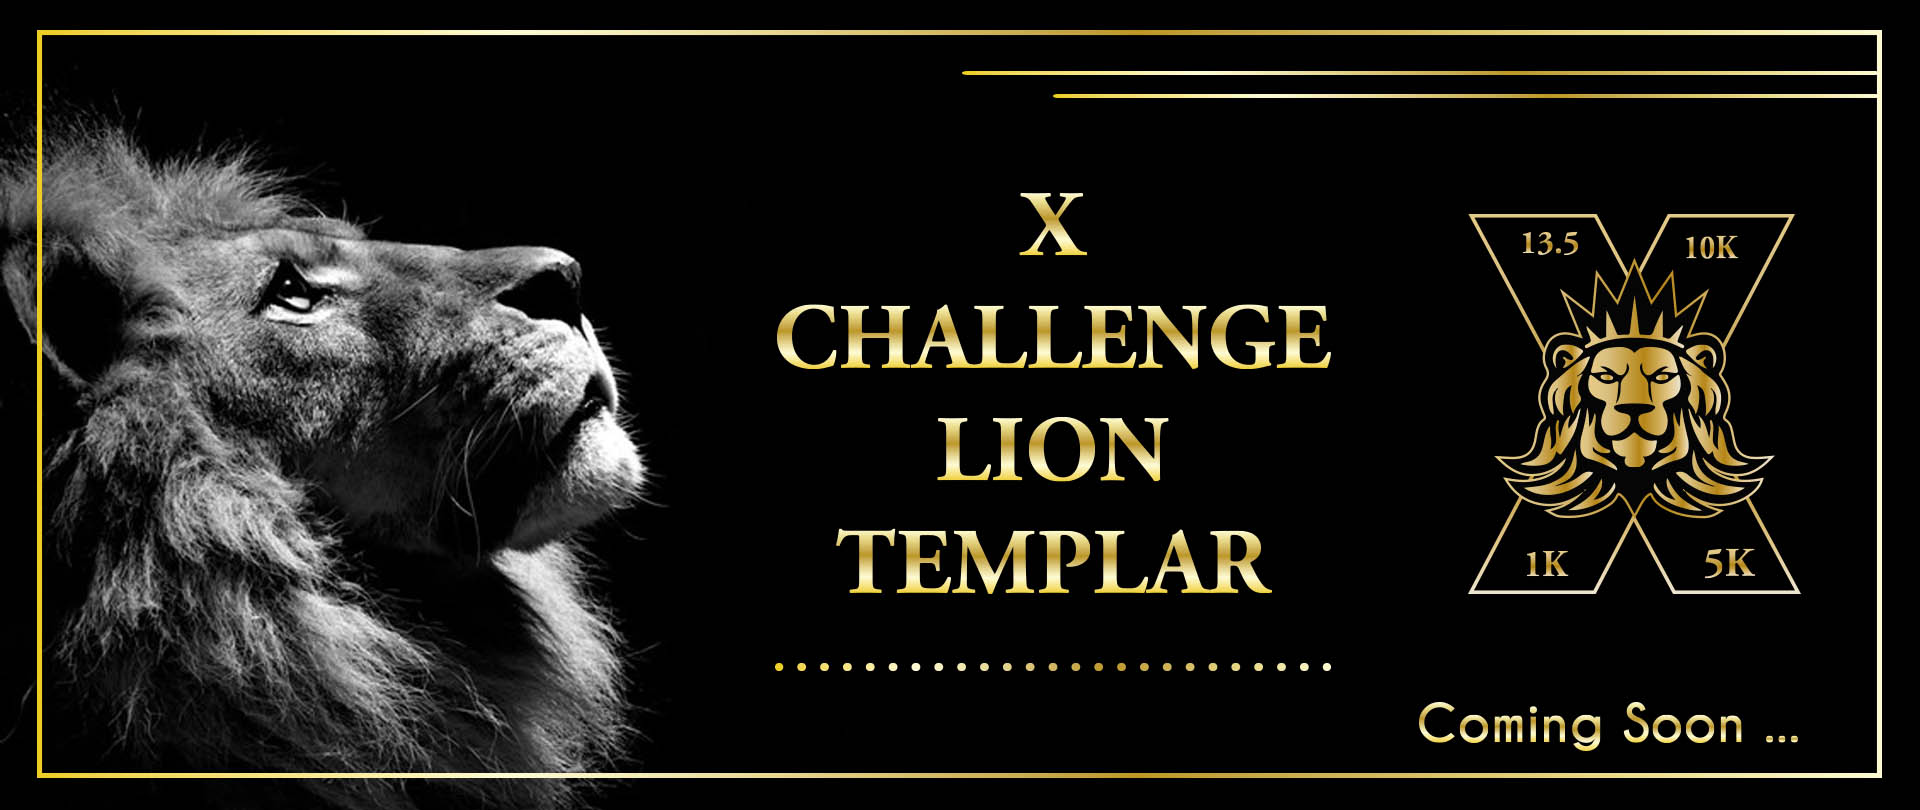 X Challenge “Lion Templar Medal” Special Edition